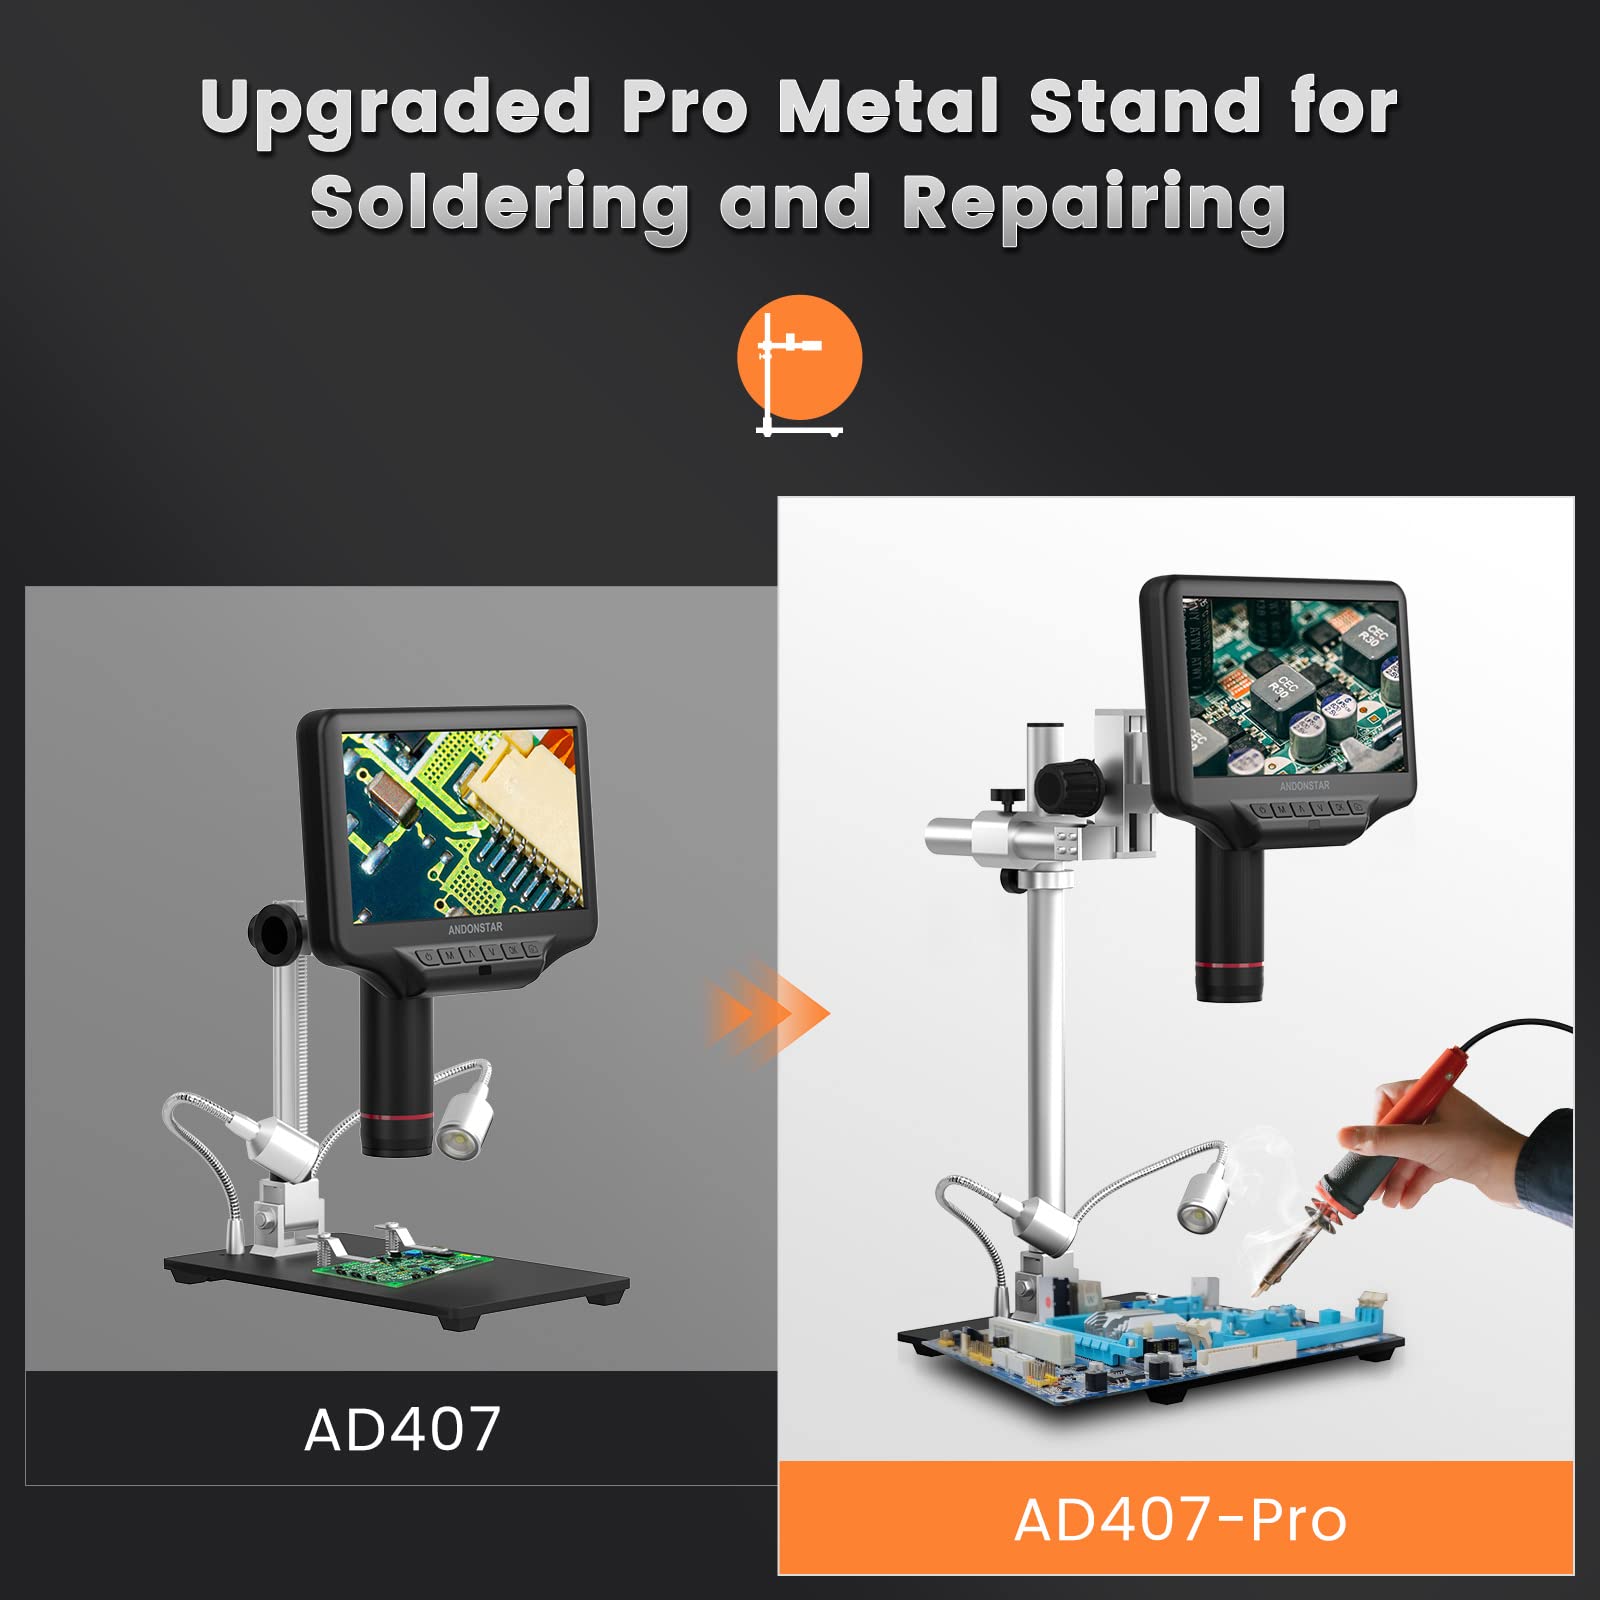 Andonstar AD407 Pro 3D HDMI Soldering Digital Microscope, 4MP 2160P UHD Video Record, 7 inch Adjustable LCD Screen USB Video Electronic Microscopes for Repairing, Circuit Board, SMT SMD DIY